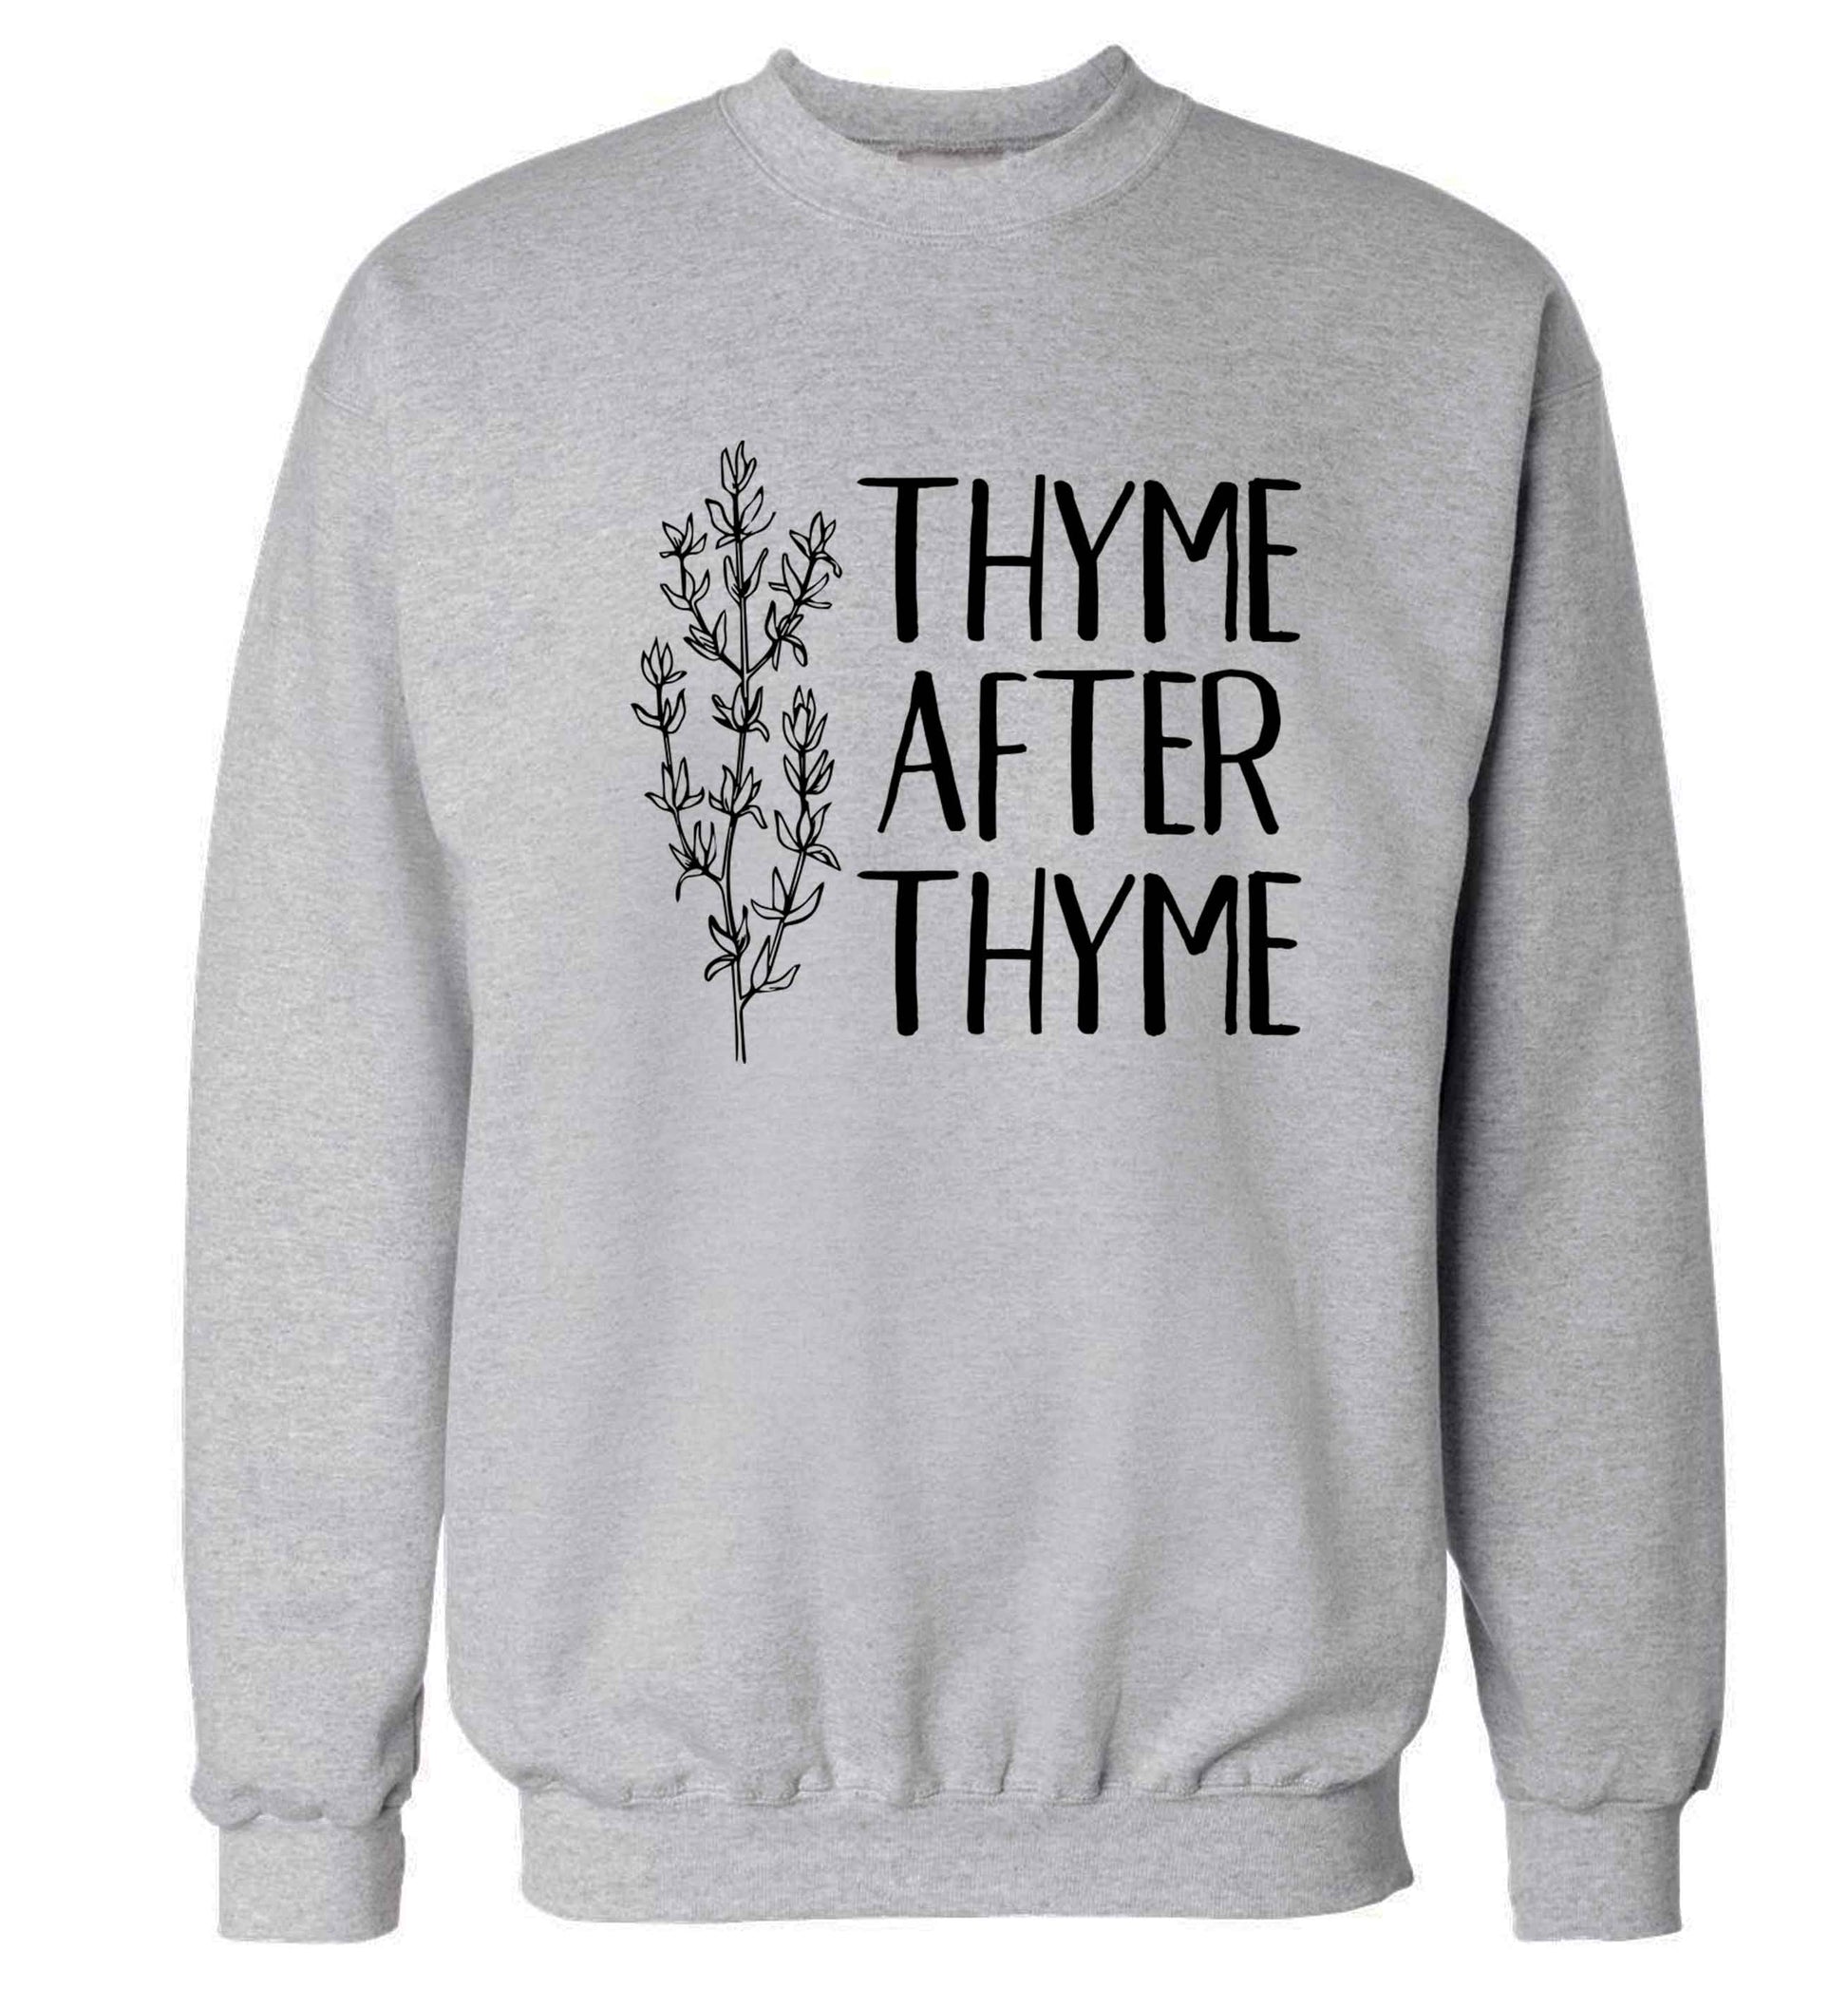 Thyme after thyme Adult's unisex grey Sweater 2XL